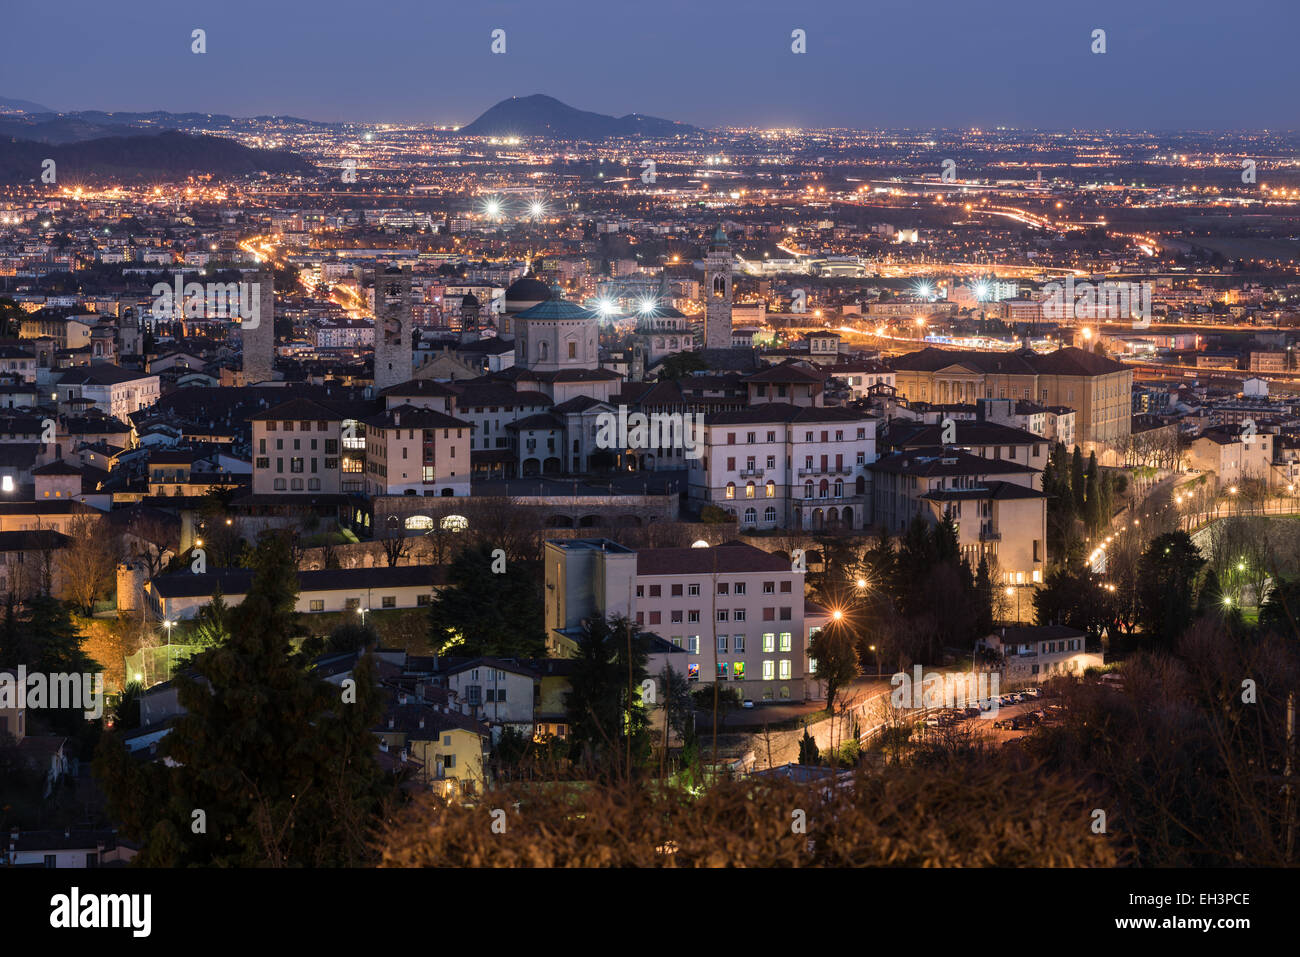 Bergamo, Italy - Aerial view of the old medieval city (Città Alta) and lower Bergamo at night. Stock Photo